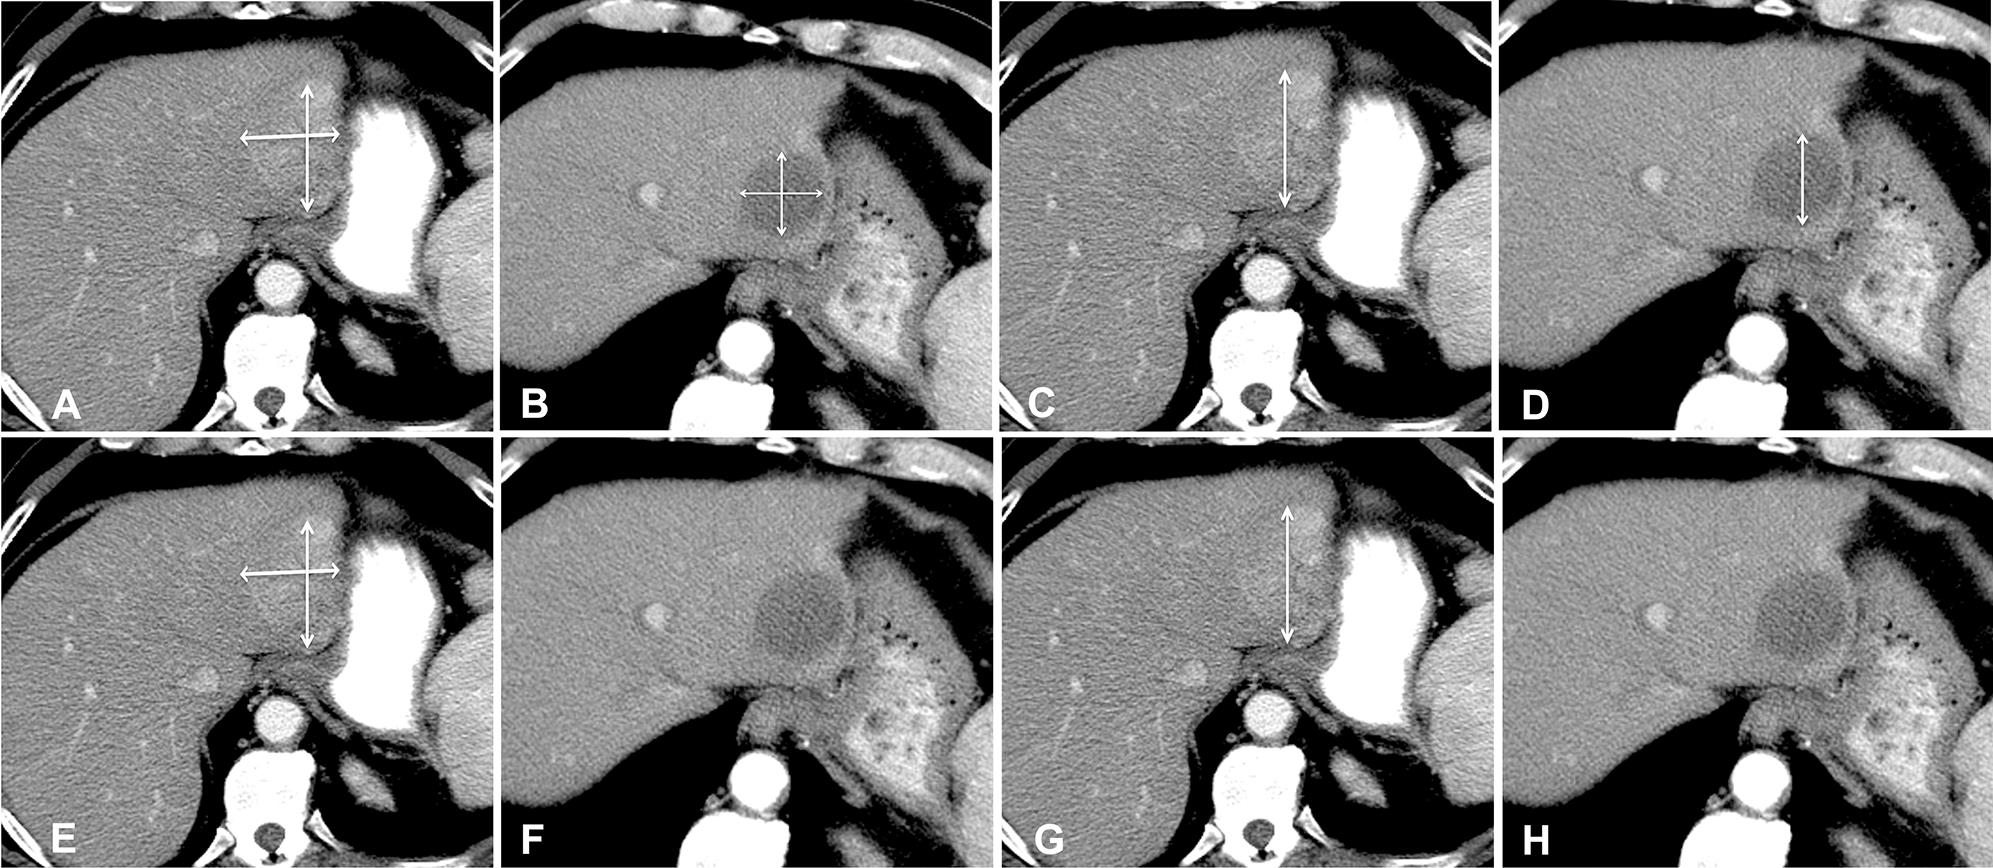 Multiple axial CT images in arterial phase in a 71 year-old man with HCC who was treated by DEB-TACE that demonstrate the most commonly employed radiologic response criteria.